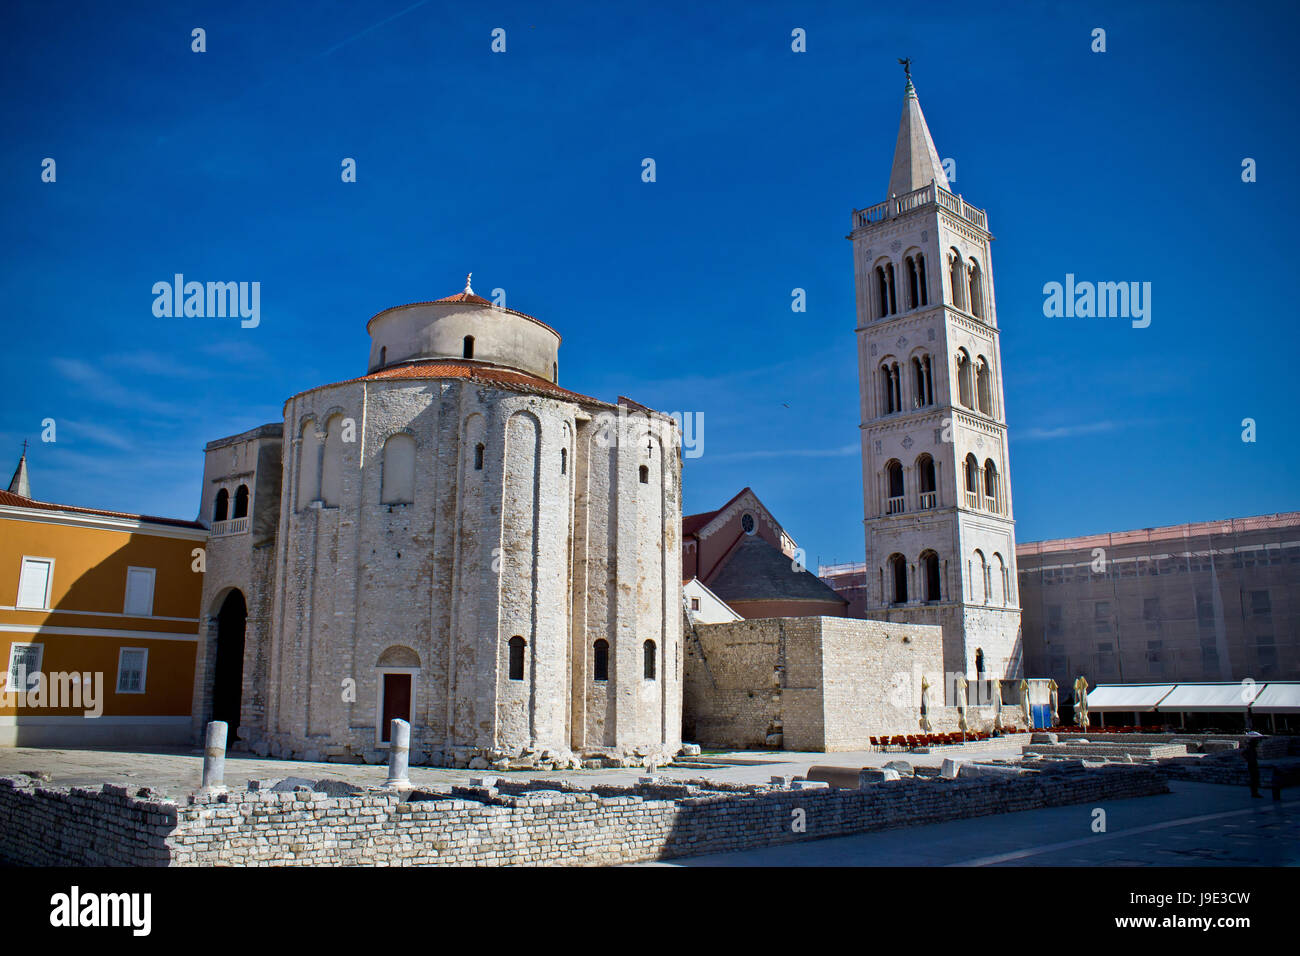 tower, travel, religion, church, city, town, monument, stone, holiday, Stock Photo